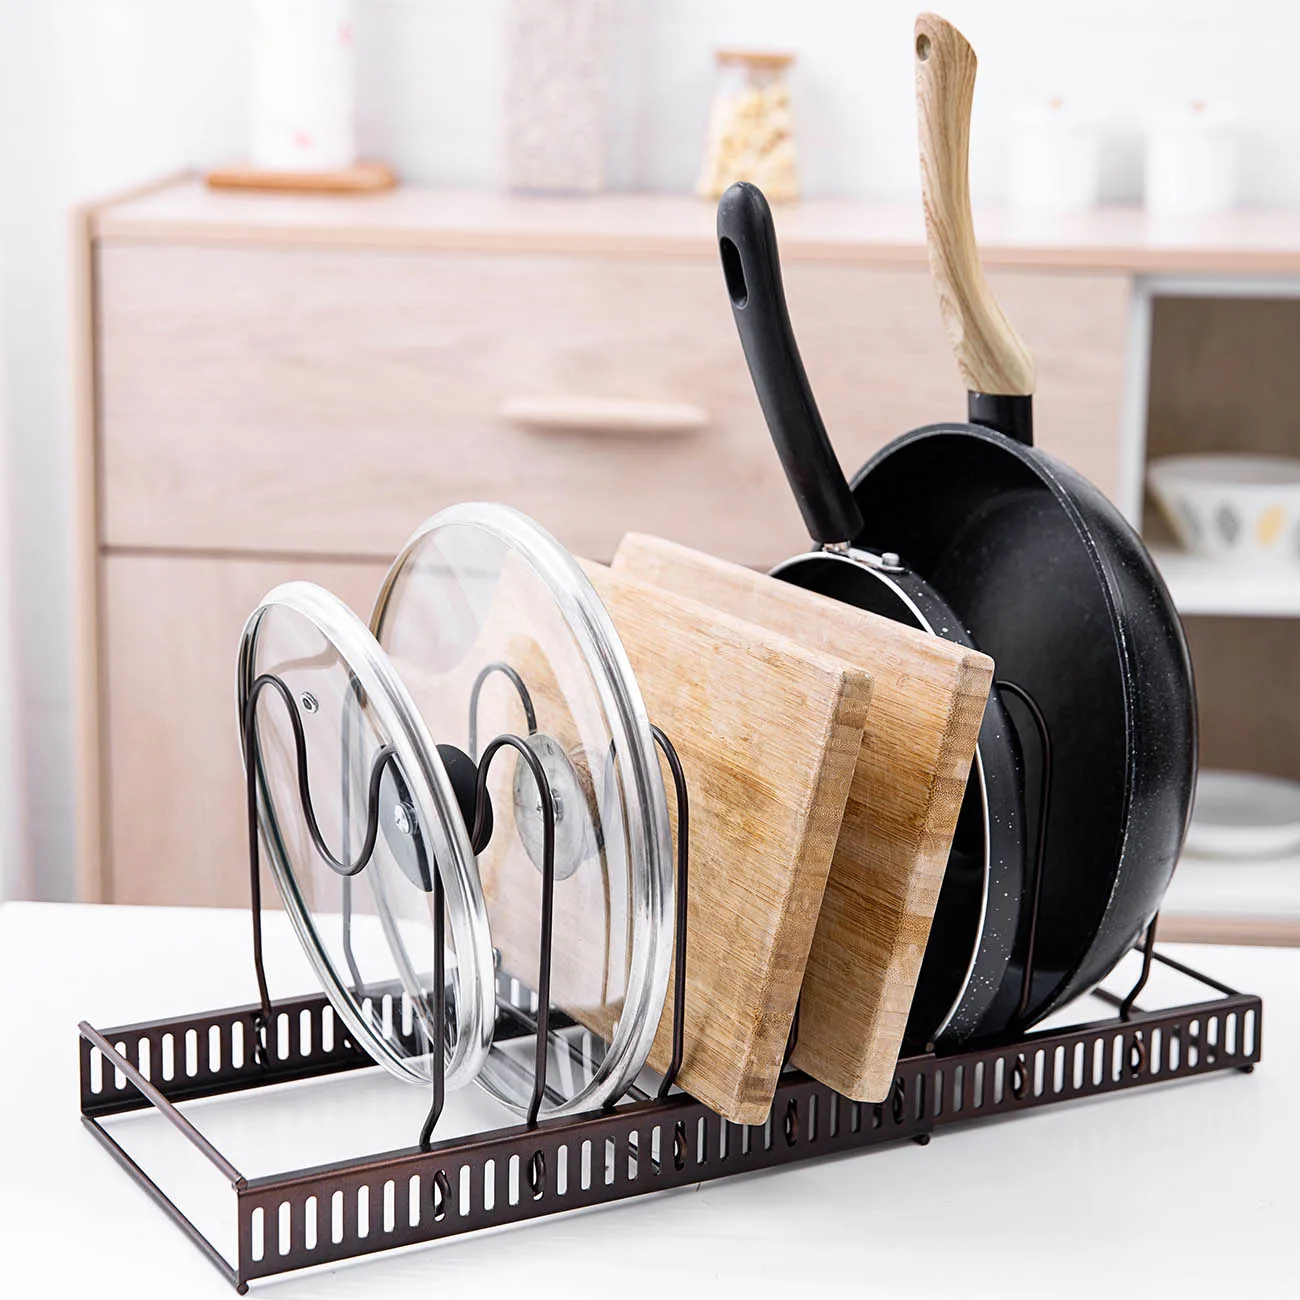 Kitchen cabinet organization made easy. From pots and pans to plates and  cups - we…